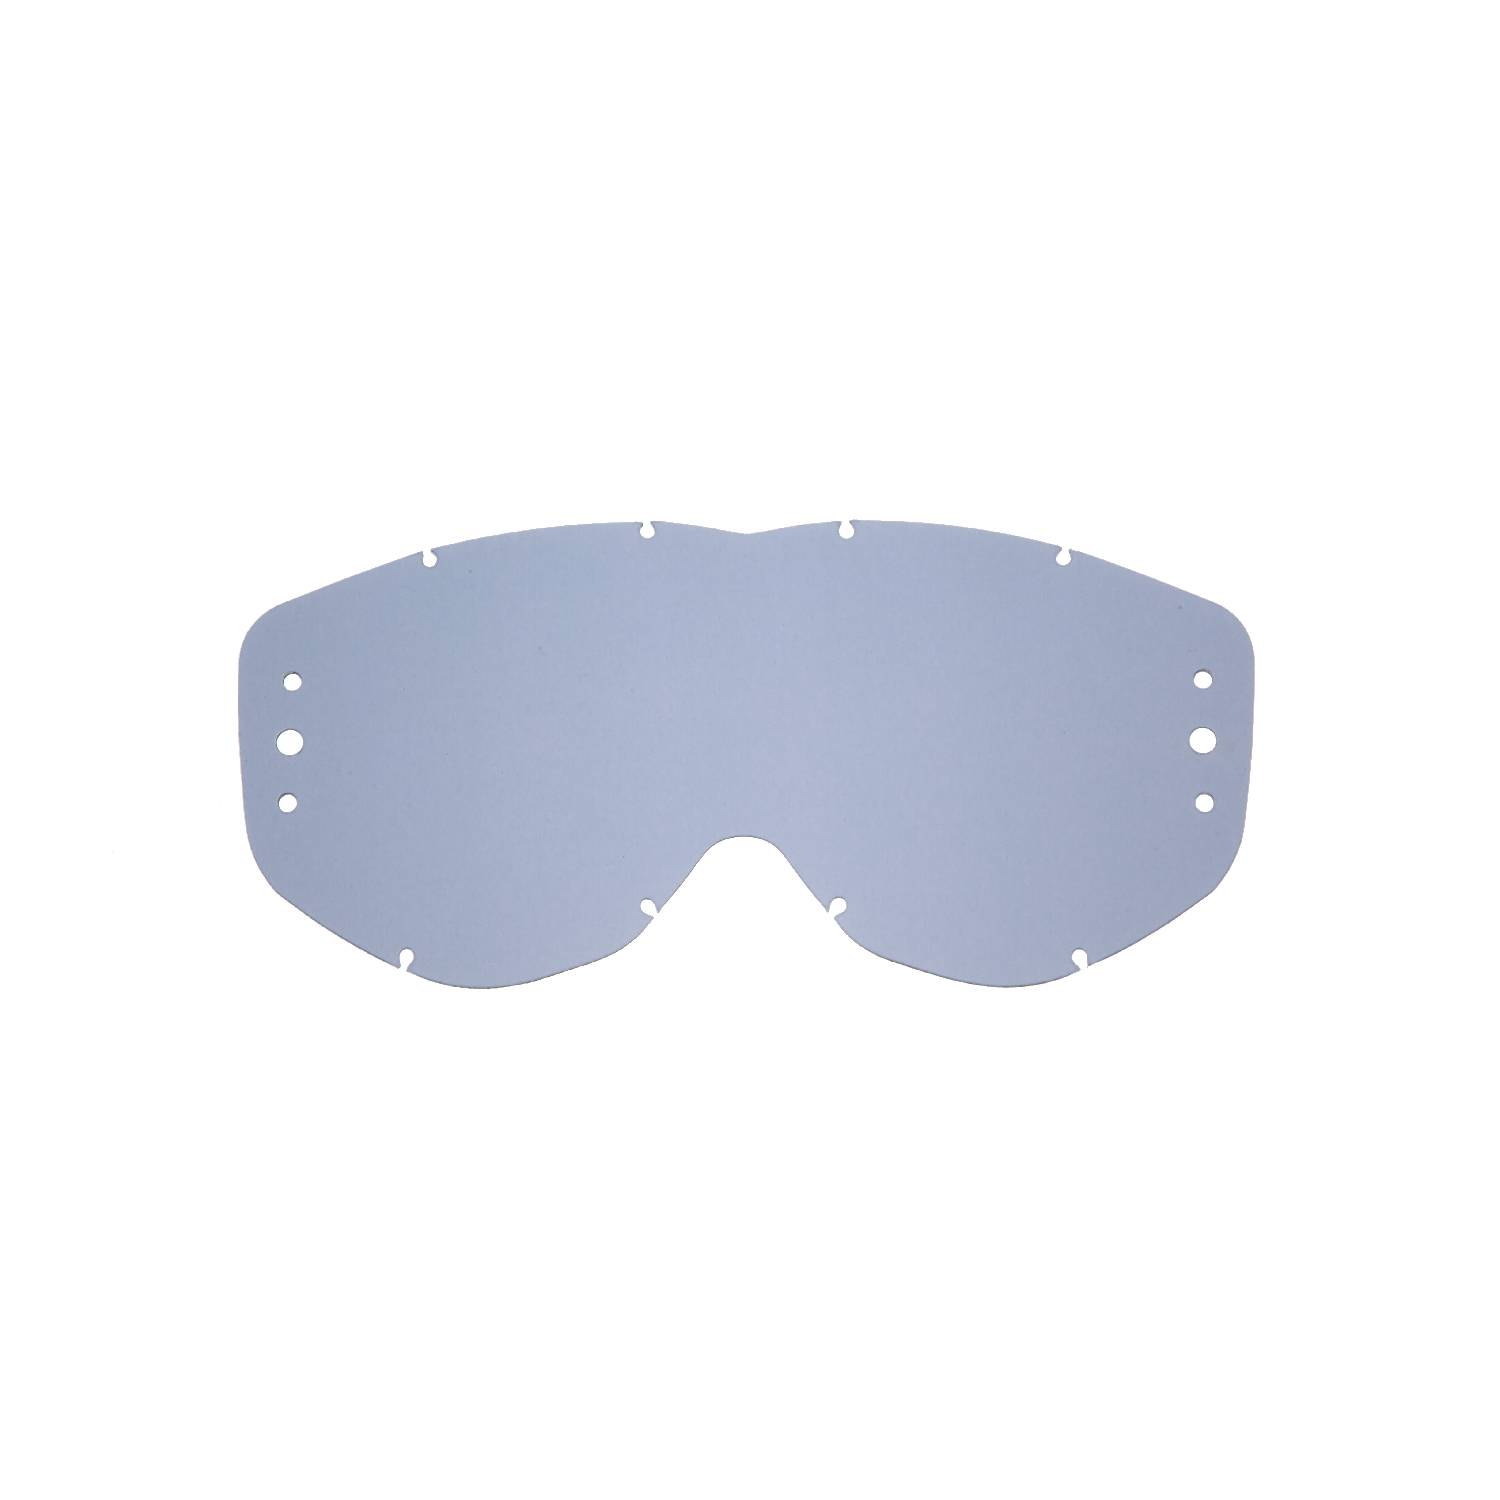 roll off lenses with smokey lenses compatible for Spy Magneto goggle